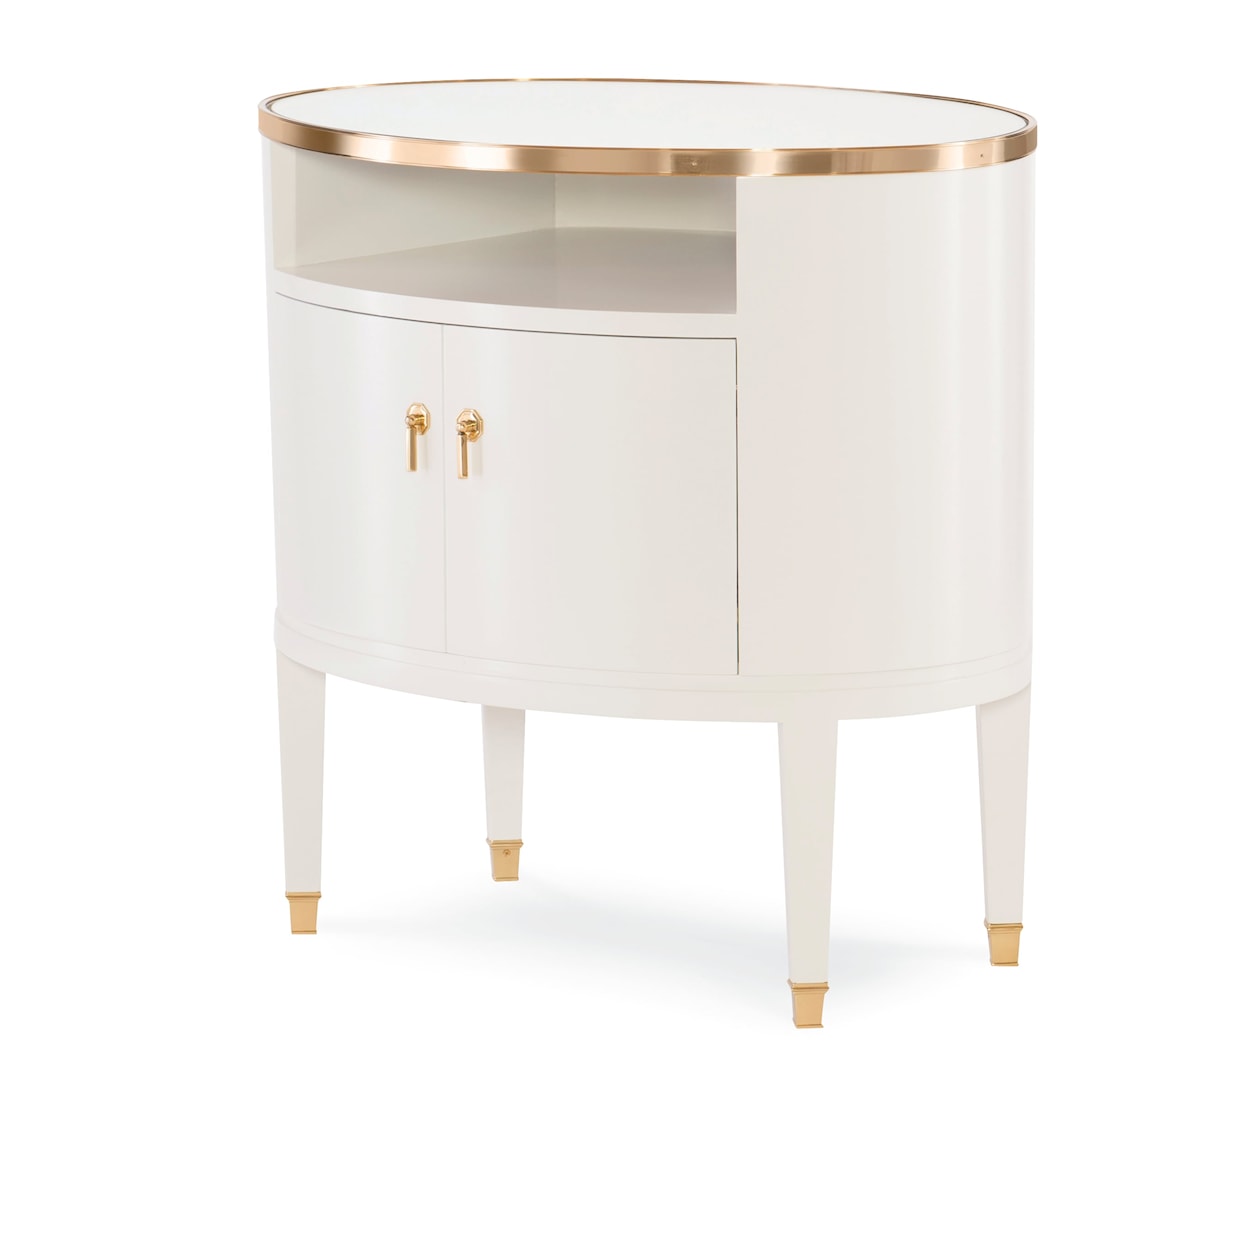 Century Windsor Smith Piroutte Side Table - Gold Hardware